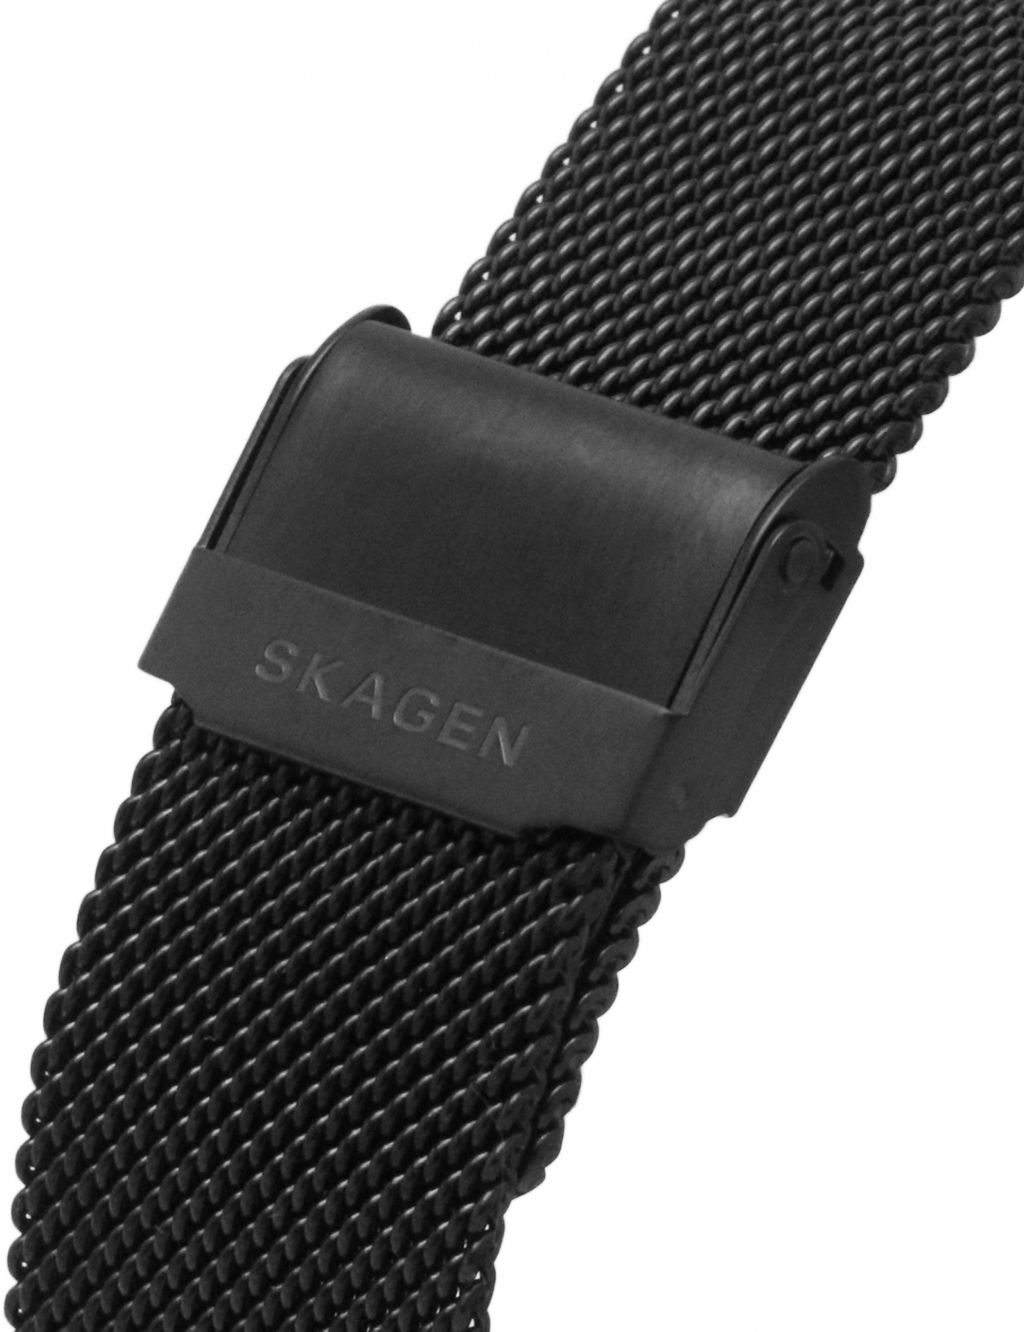 Skagen Anchor Chronograph Black Stainless Steel Watch image 2